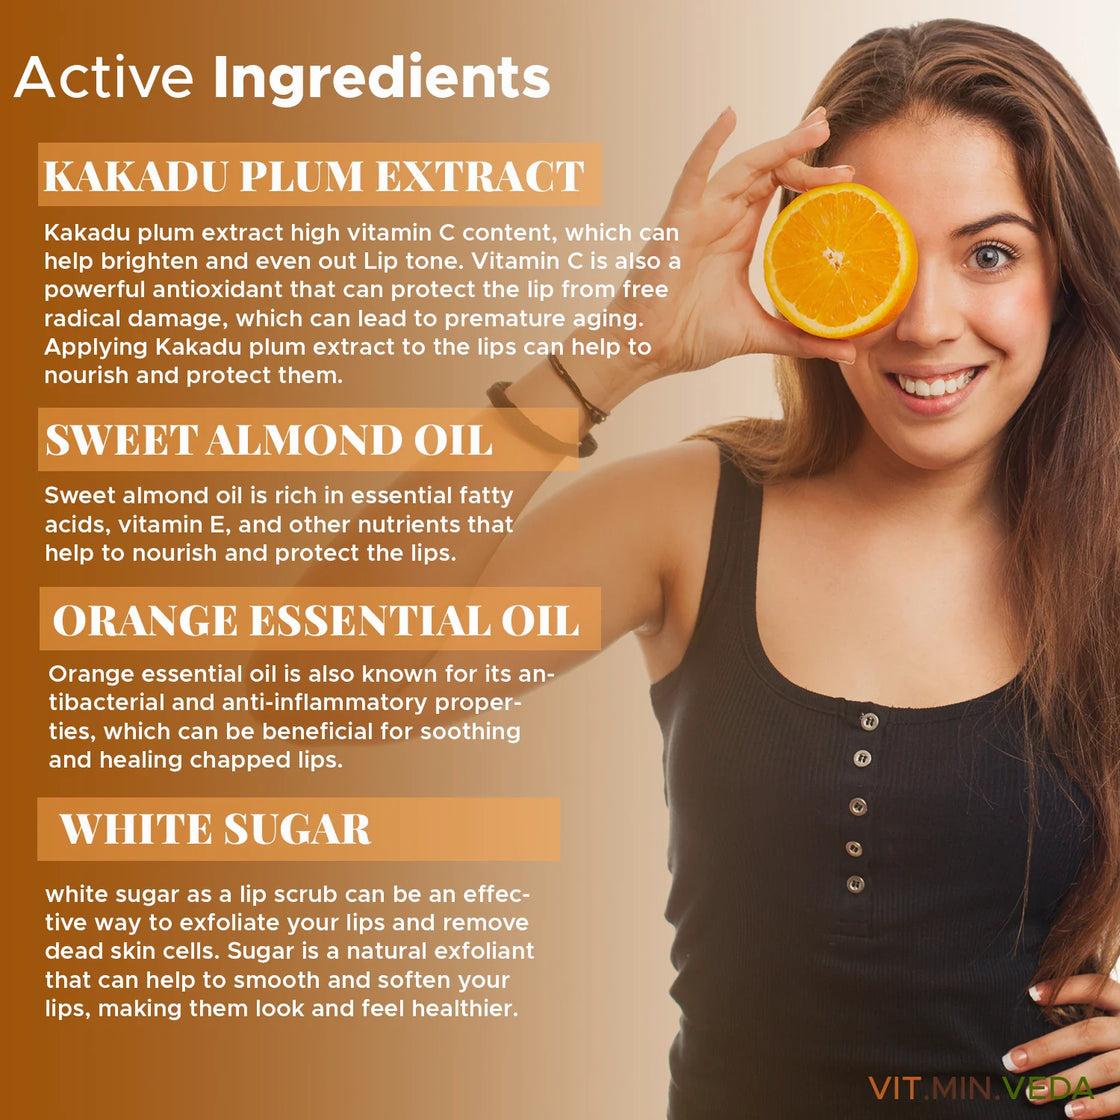 A woman holding an orange peel to her lips with text overlay of the active ingredients in a lip scrub.